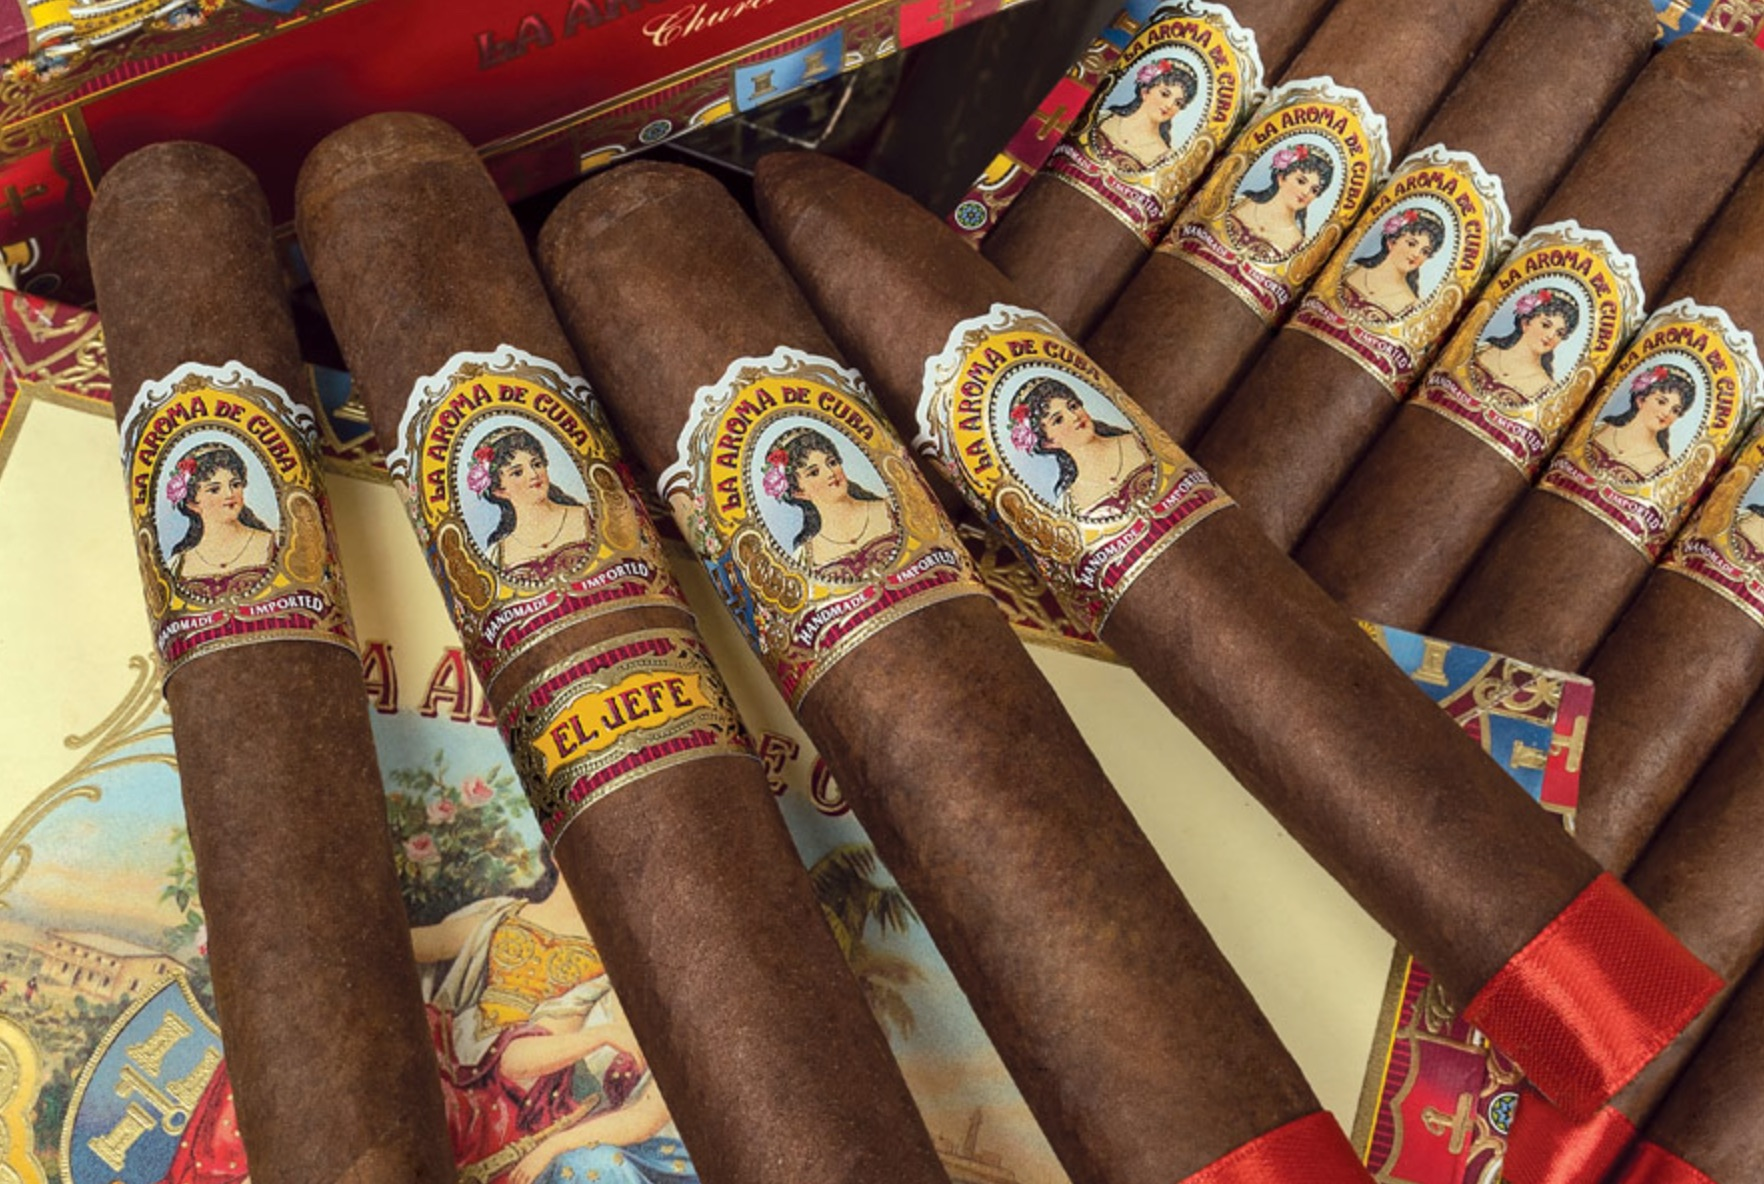 An image of La Aroma de Cuba cigars, known for their rich and distinct taste sensations.